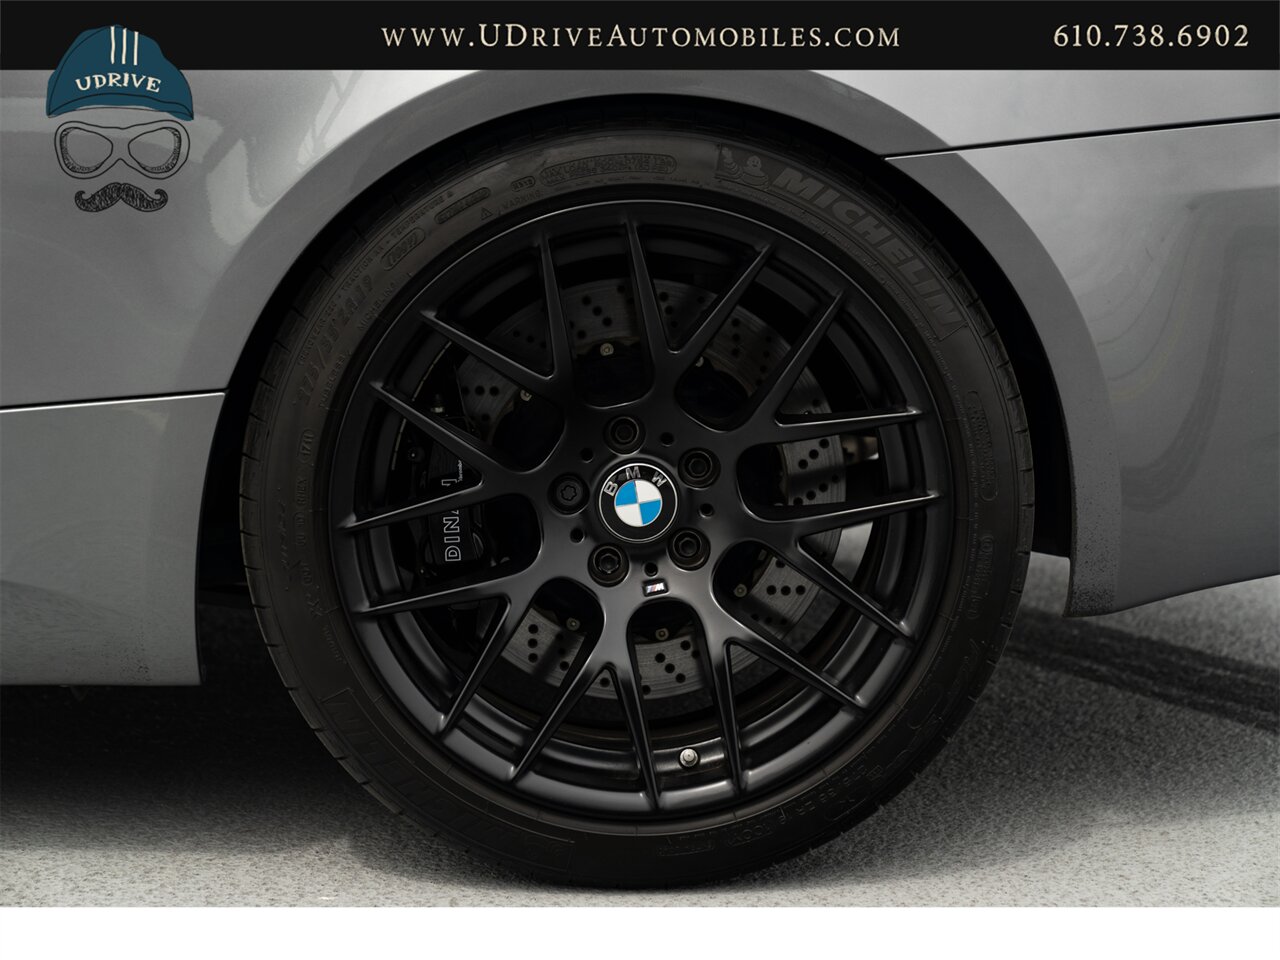 2012 BMW M3 E92 6 Speed 7k Miles Dinan Upgrades  GTS/359 Wheels Carbon Fiber Roof - Photo 54 - West Chester, PA 19382